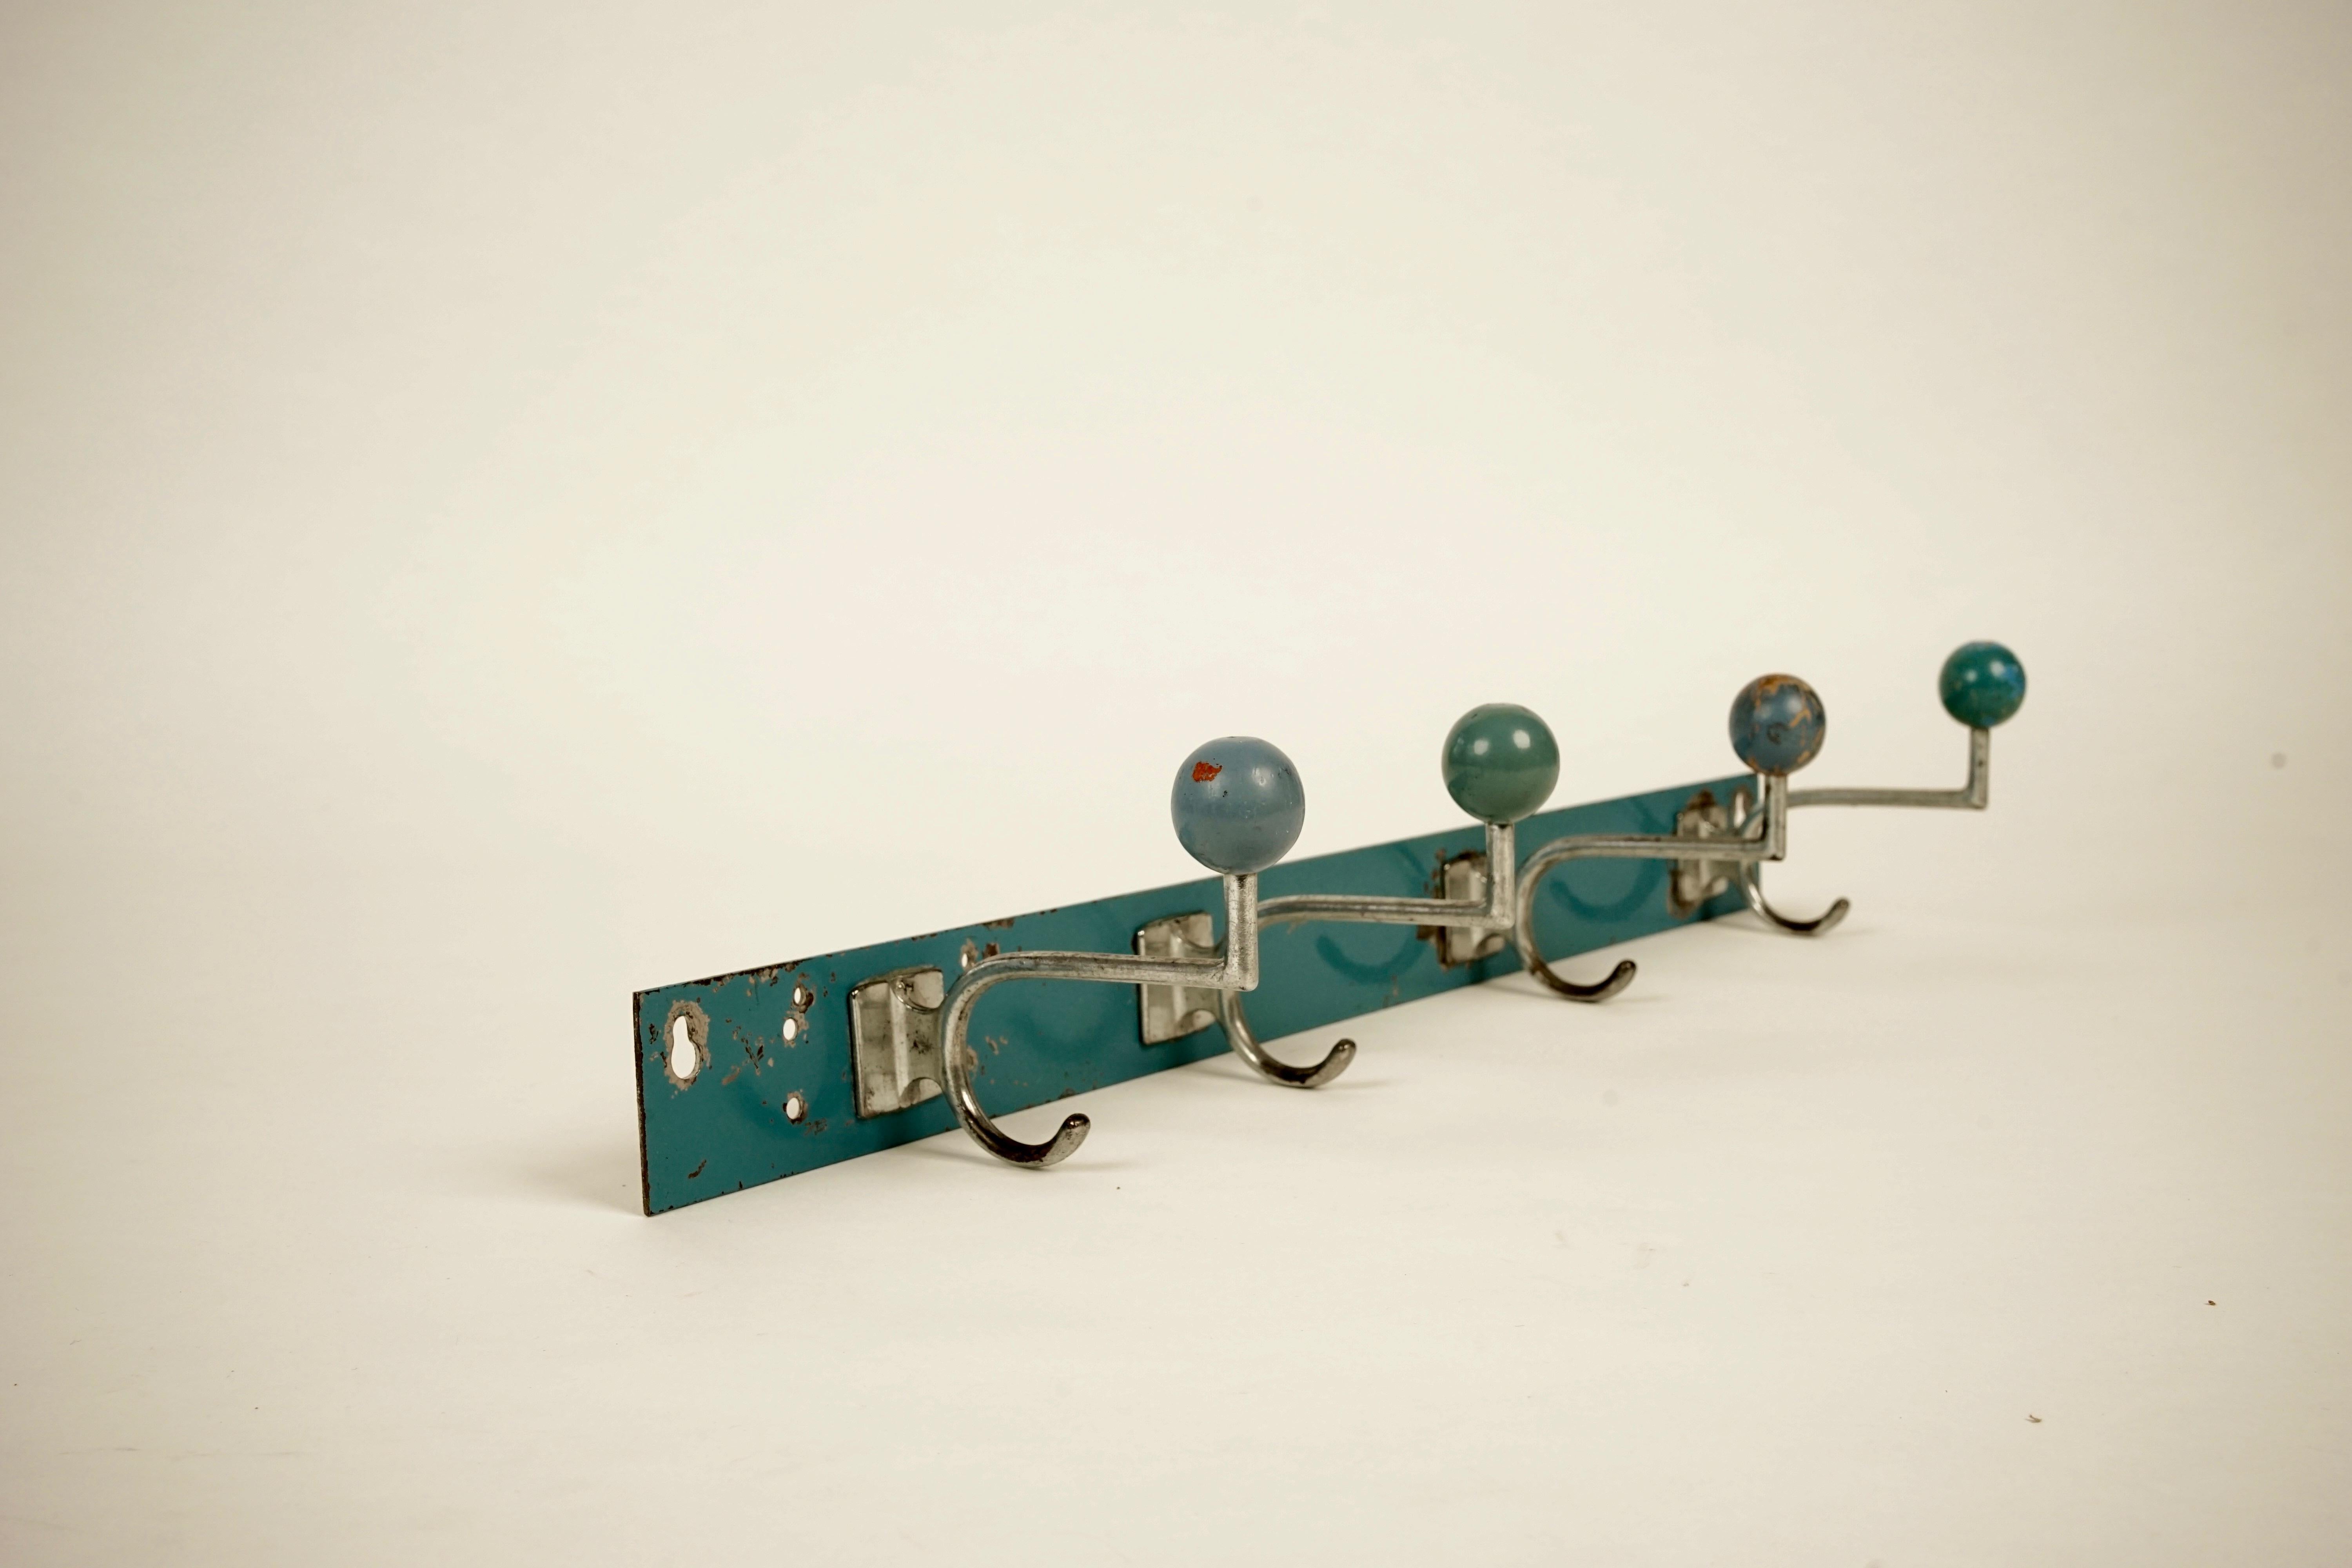 Coat hooks from the 1930s.
Wonderful industrial design, manufactured in metal, chrome platted with wooden knobs, painted in turquoise blue.